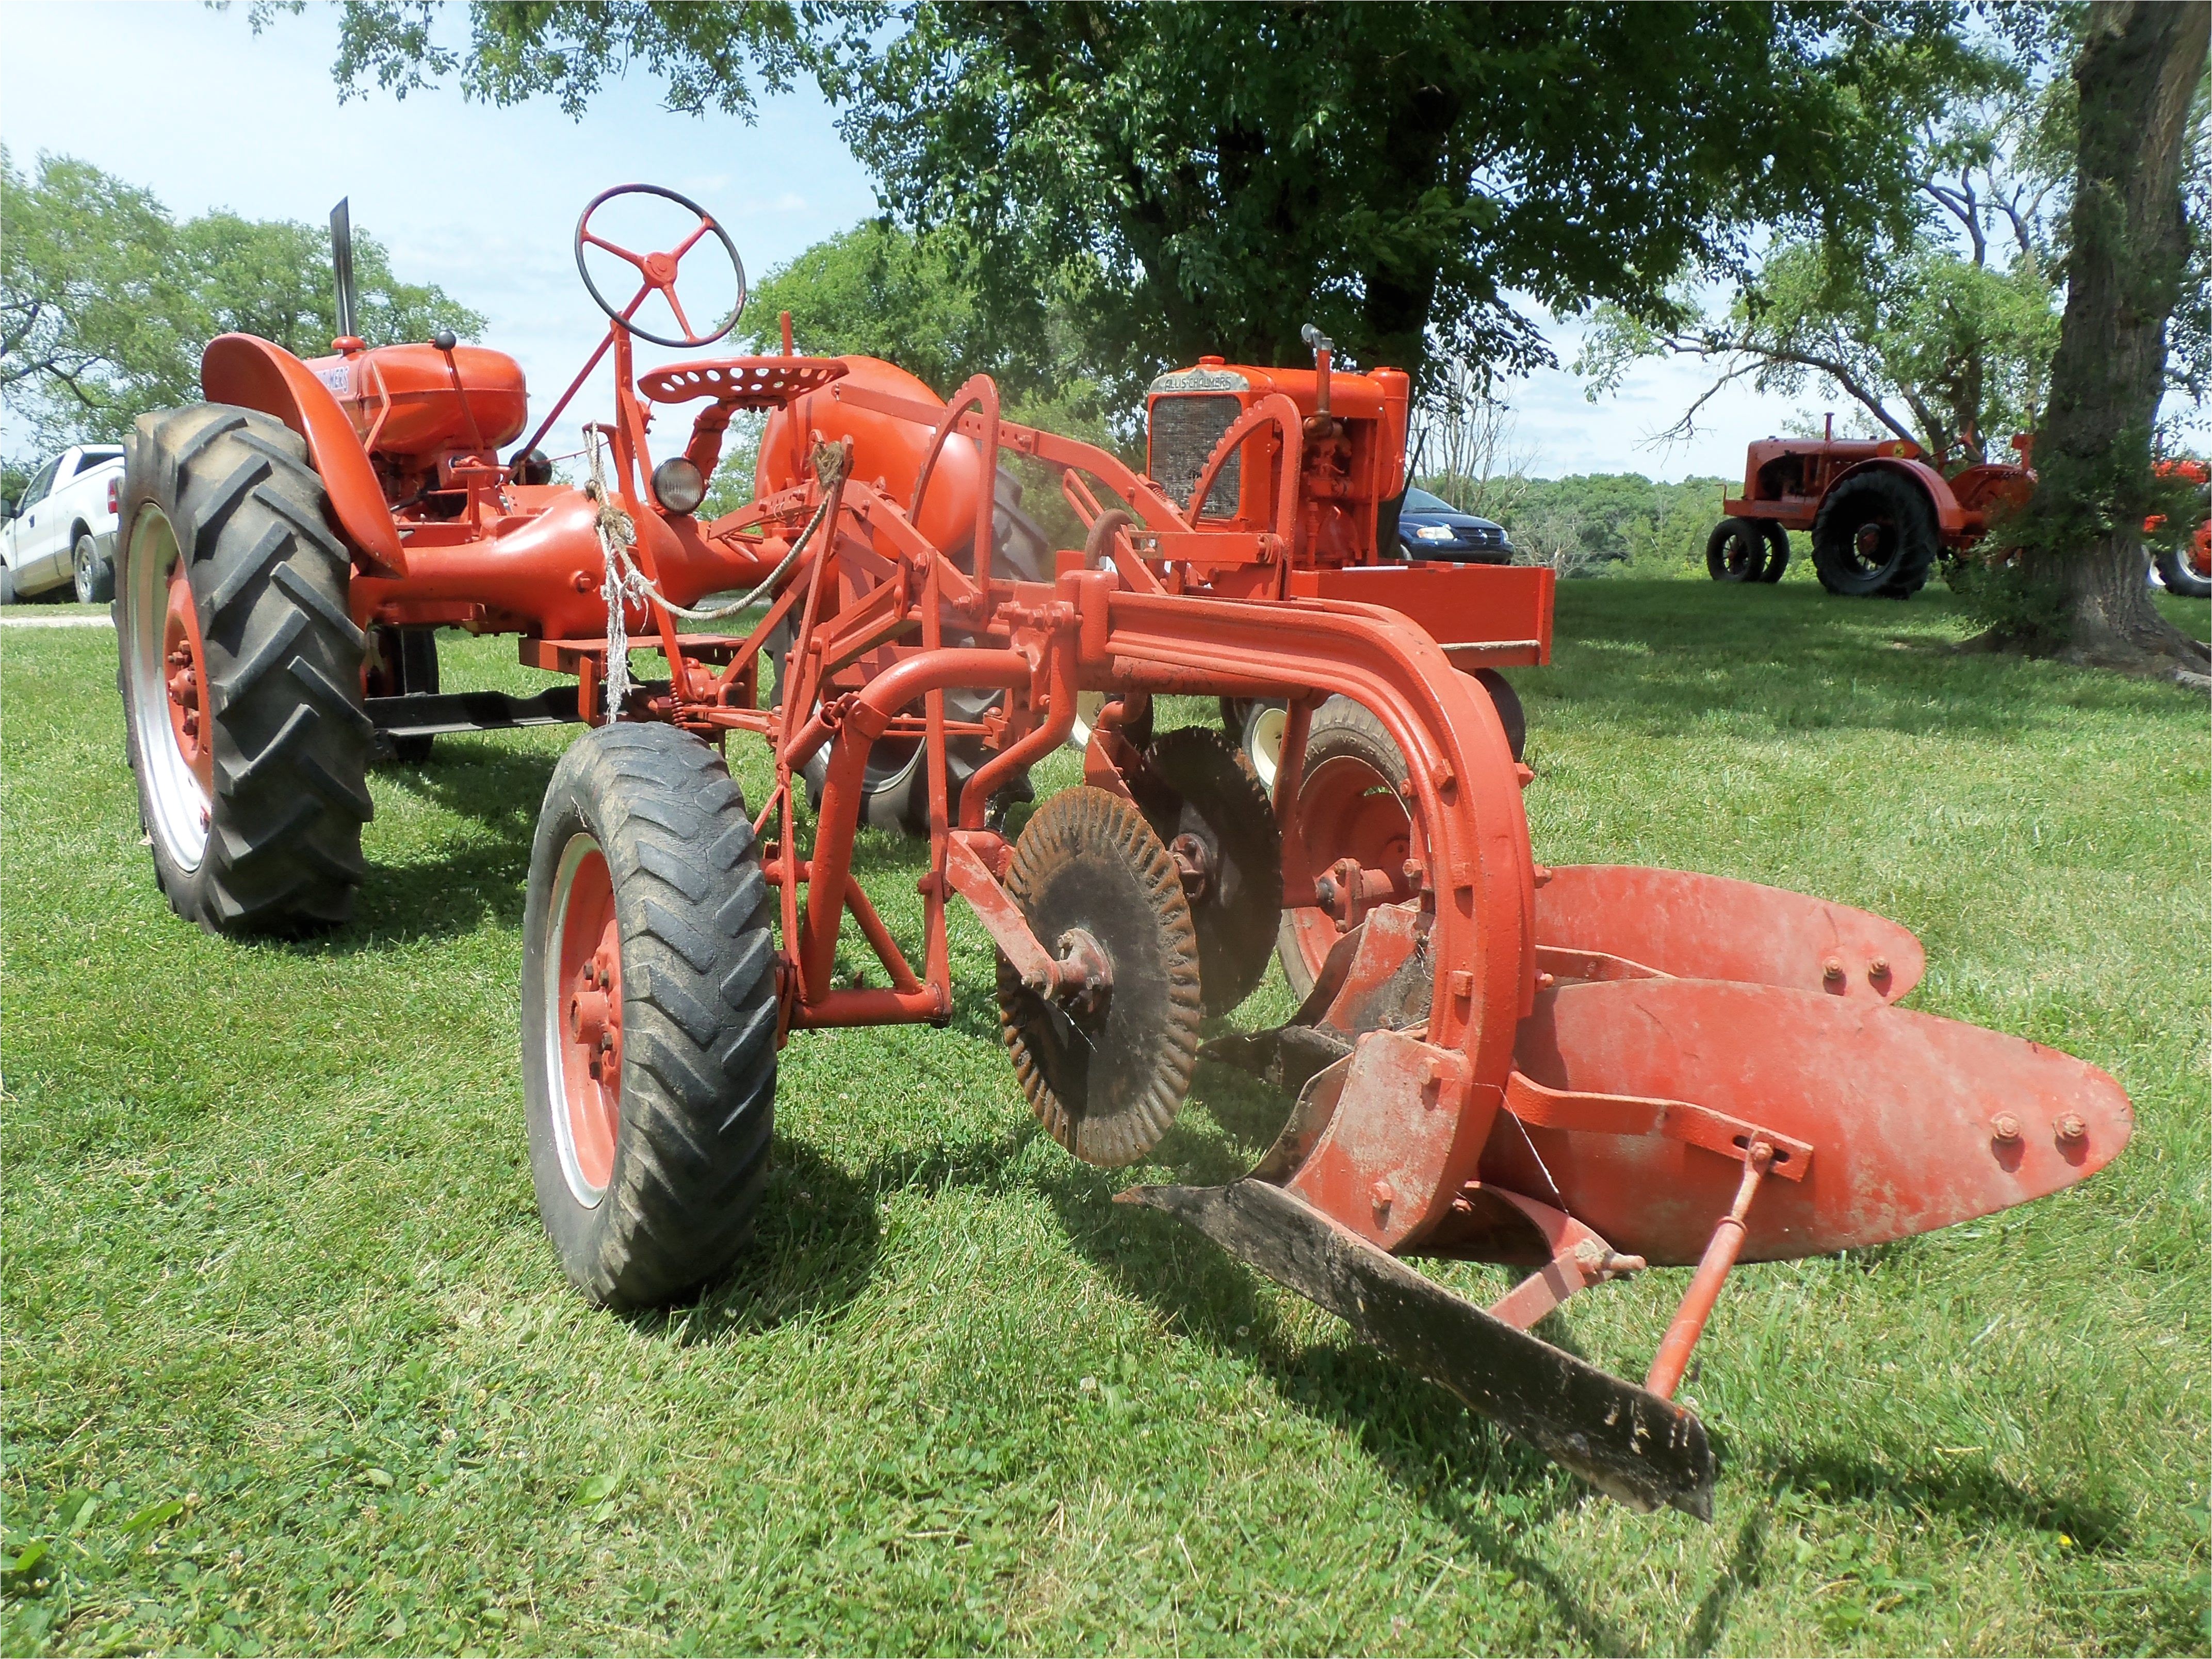 1940 allis chalmers rc tractor with 2 bottom plow rc tractors